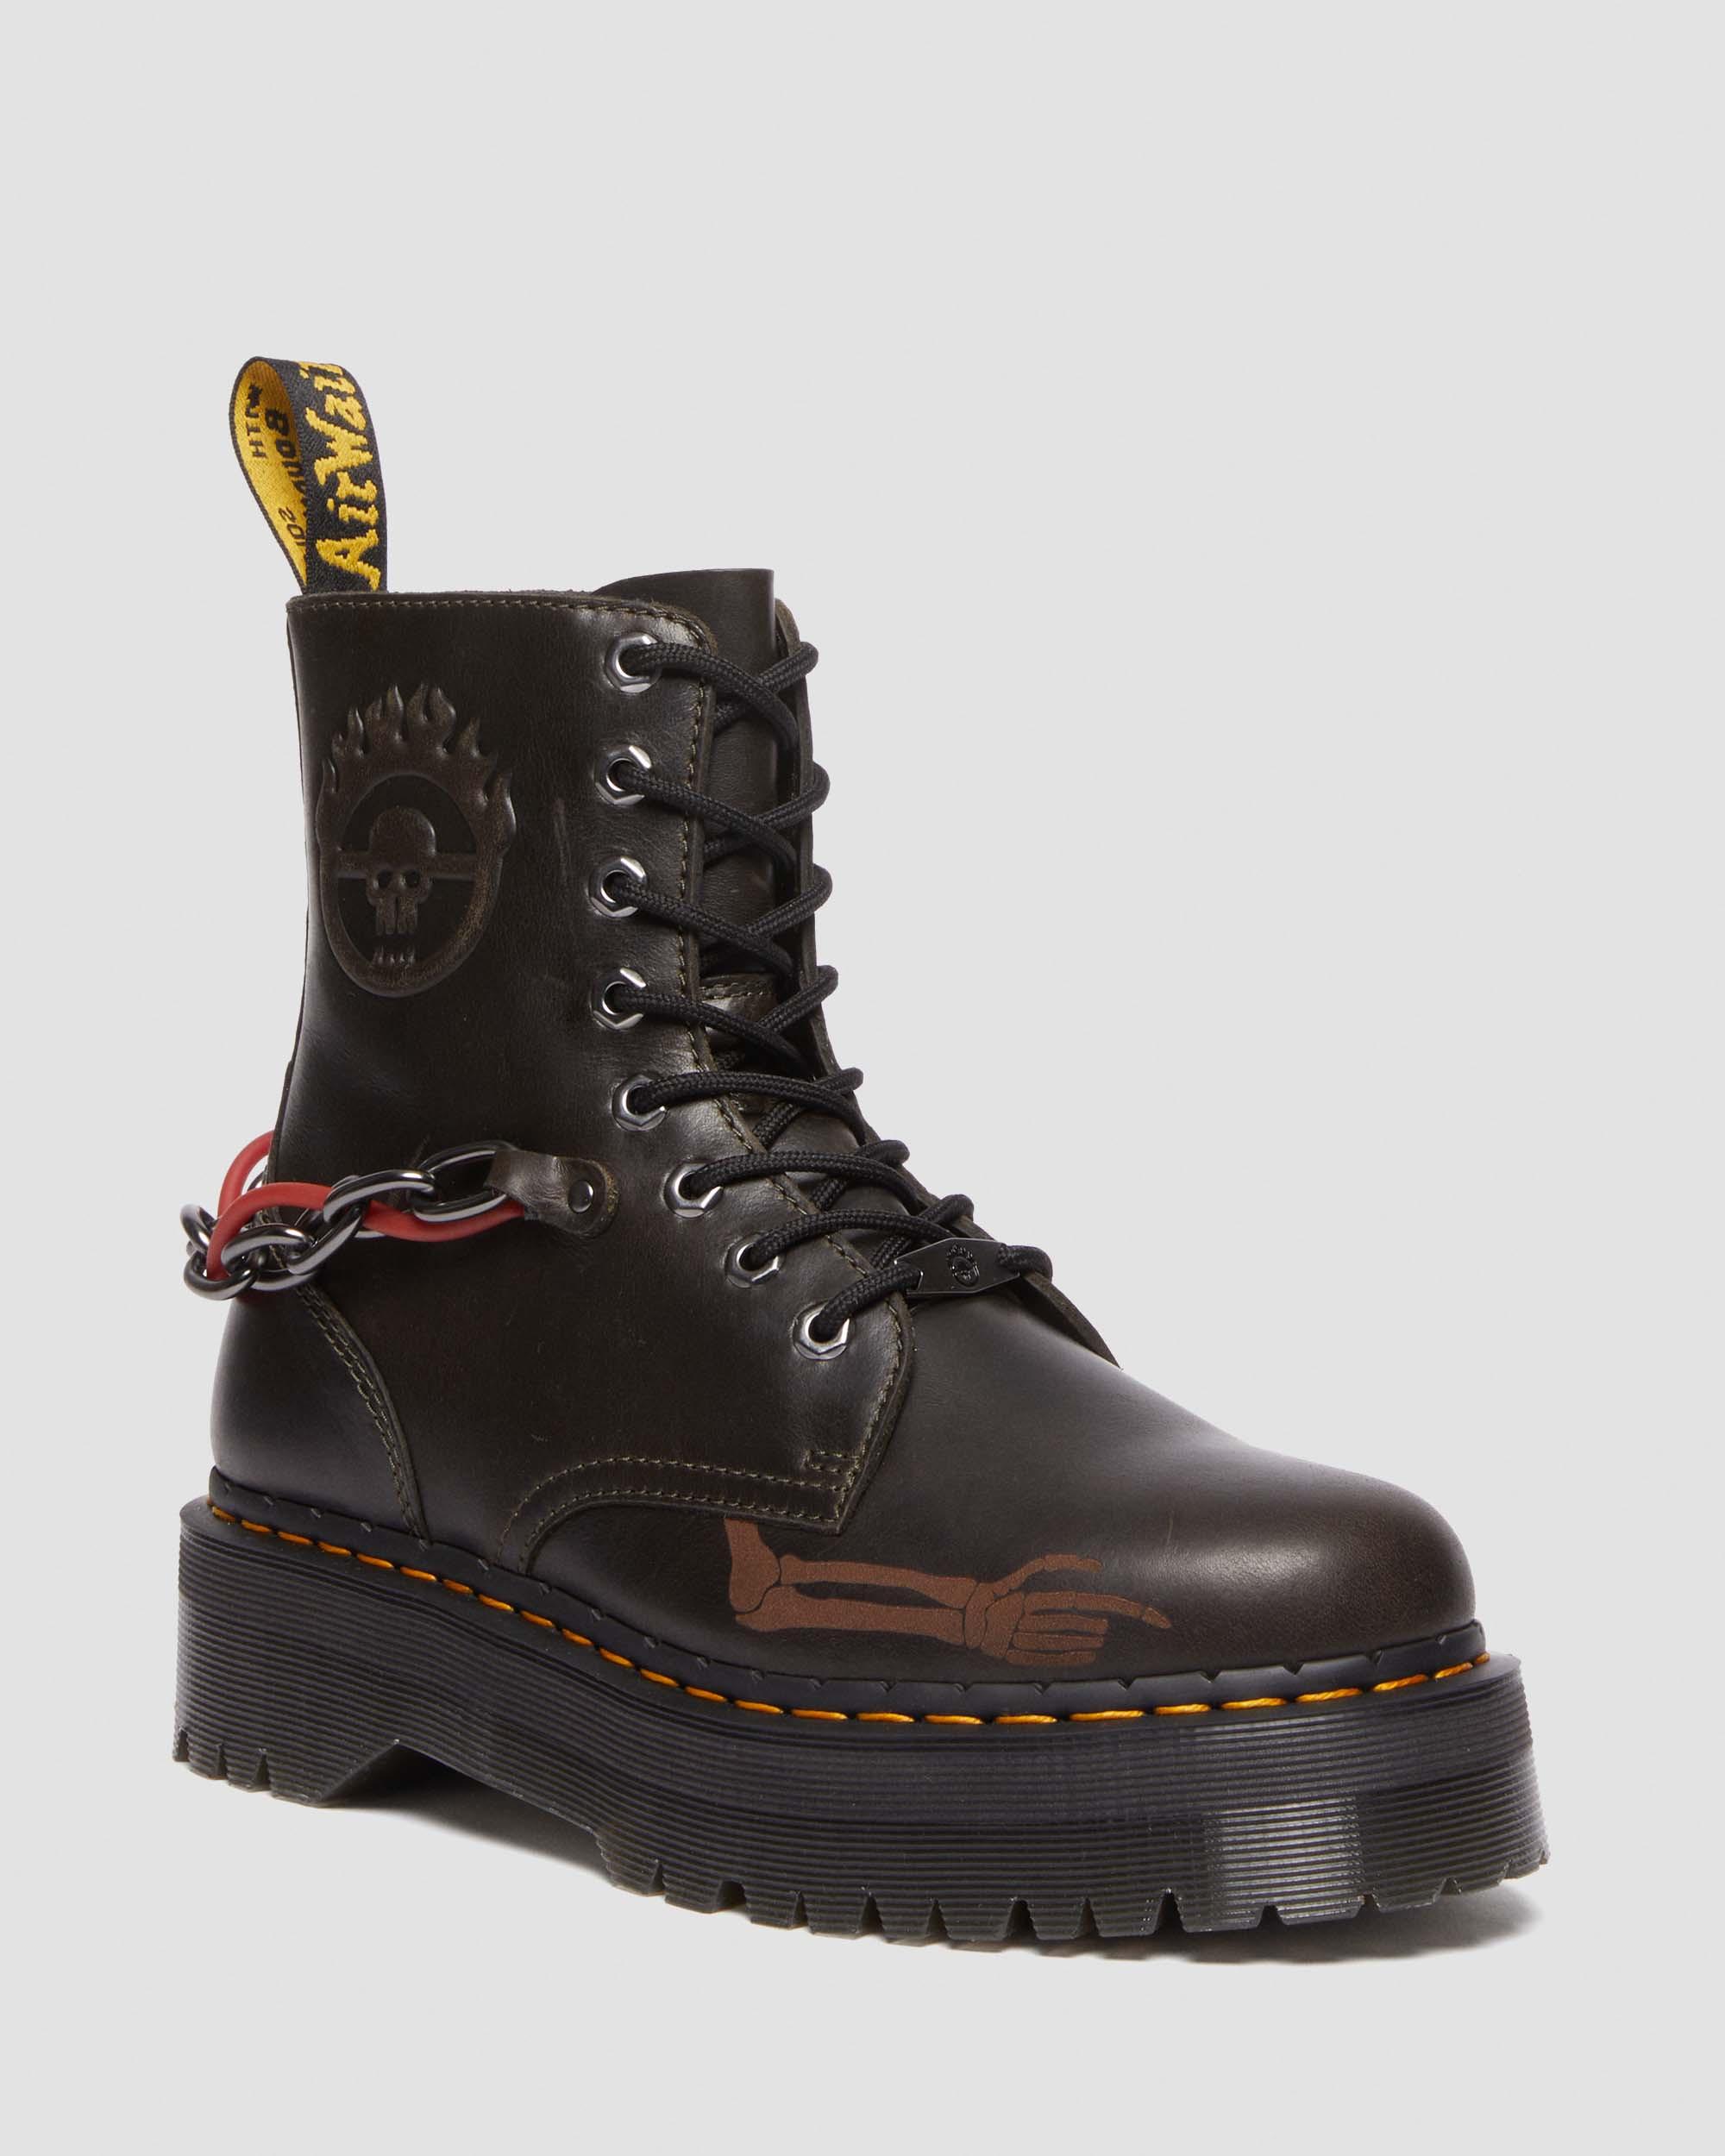 Jadon Mad Max Leather Boots in Dark Taupe